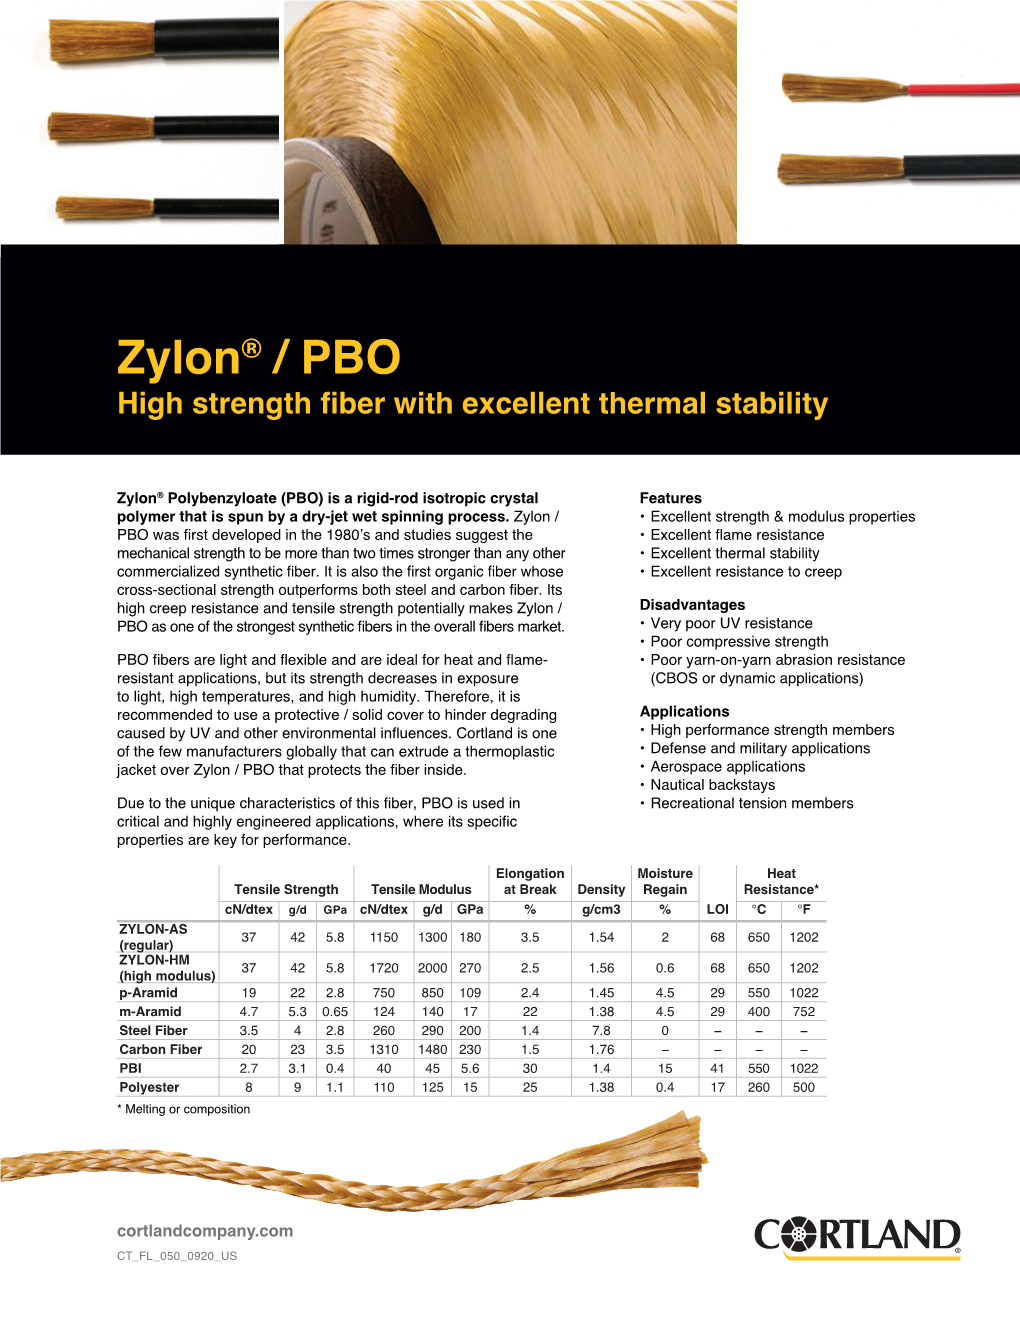 Zylon® / PBO High Strength Fiber with Excellent Thermal Stability